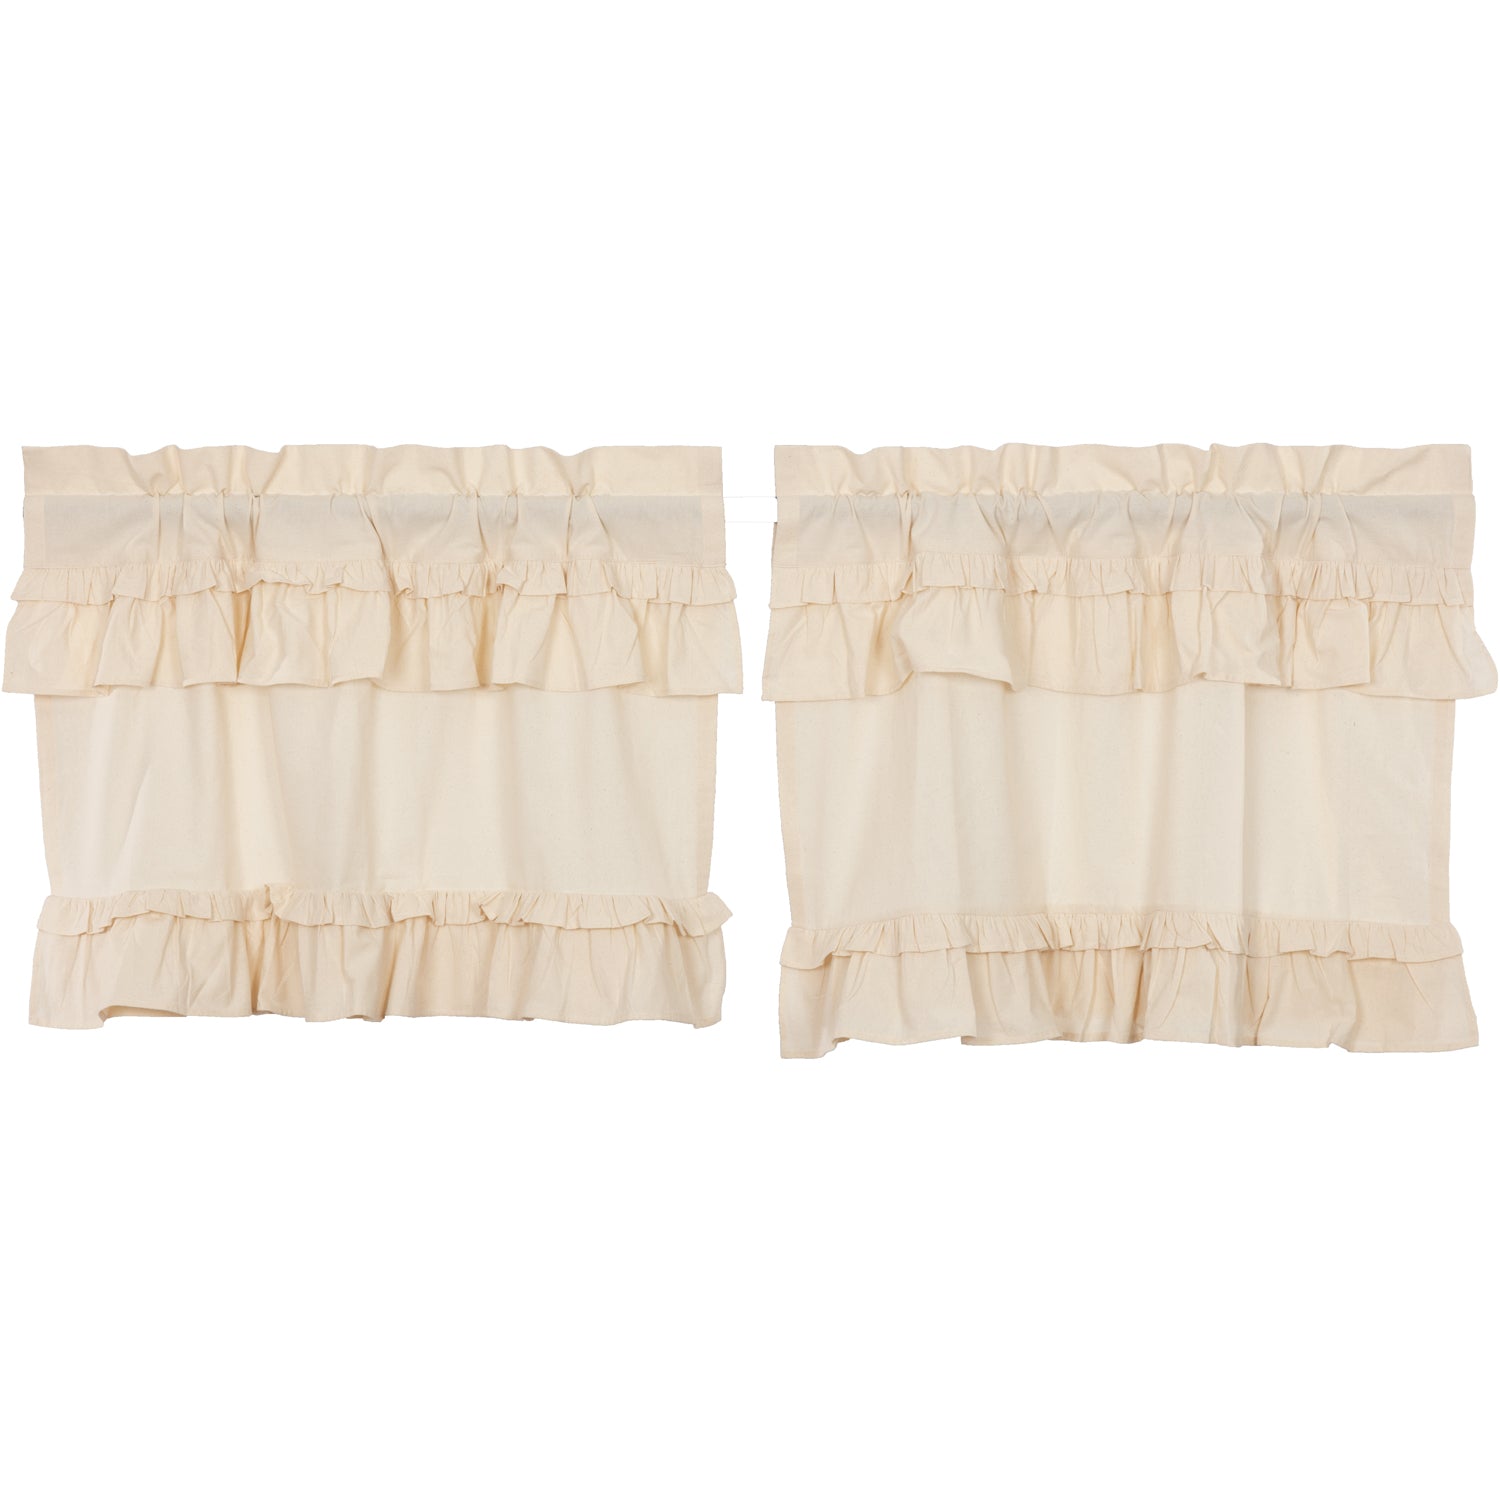 51989-Muslin-Ruffled-Unbleached-Natural-Tier-Set-of-2-L24xW36-image-6